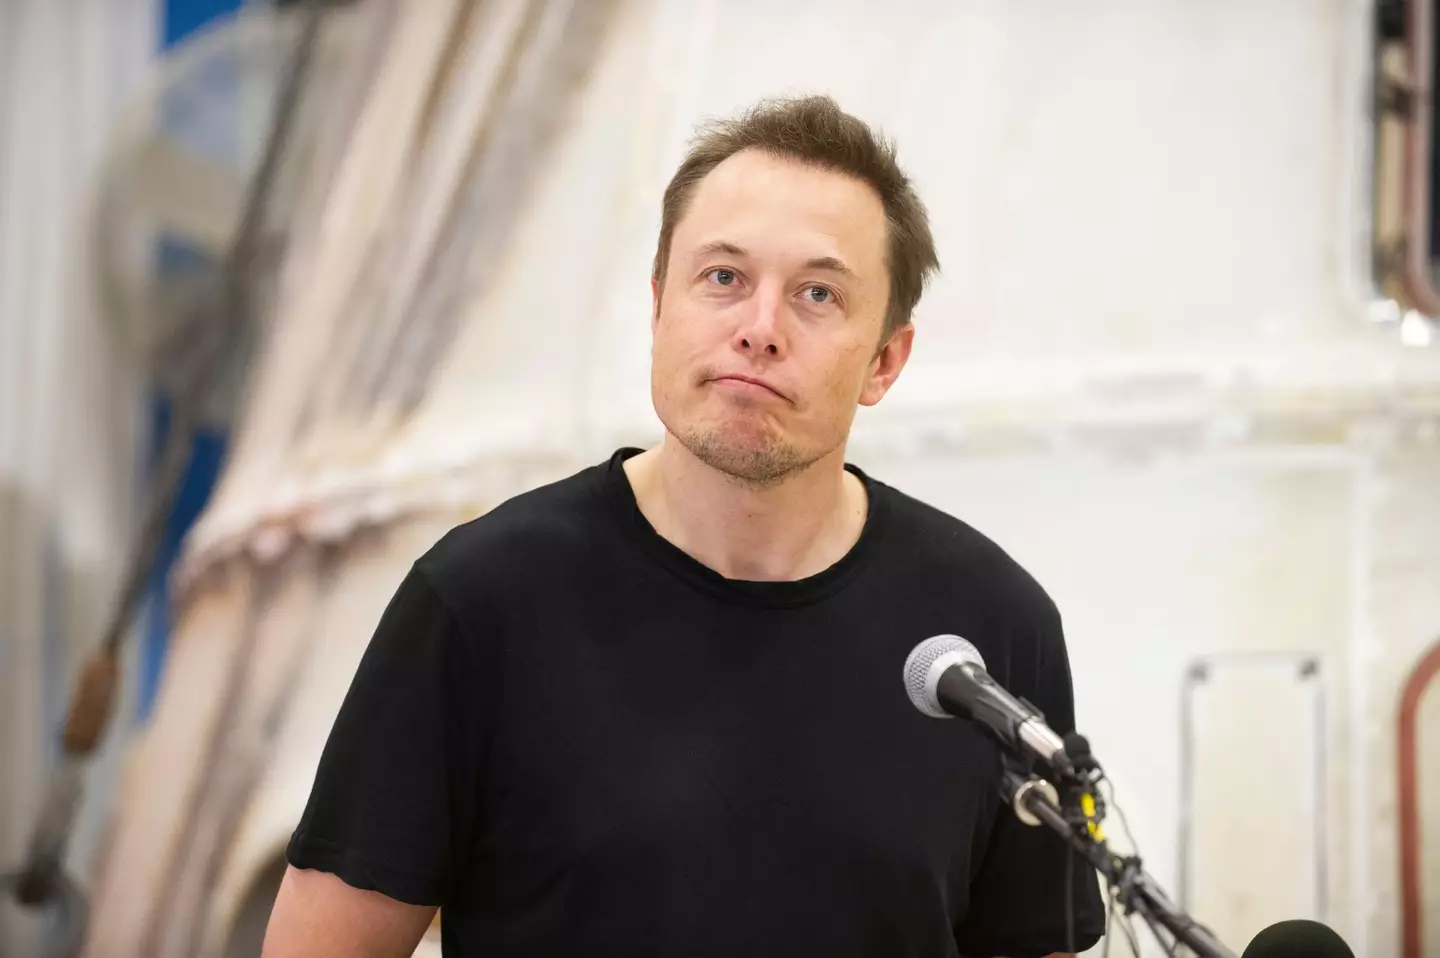 Elon Musk has warned that Twitter is facing bankruptcy.